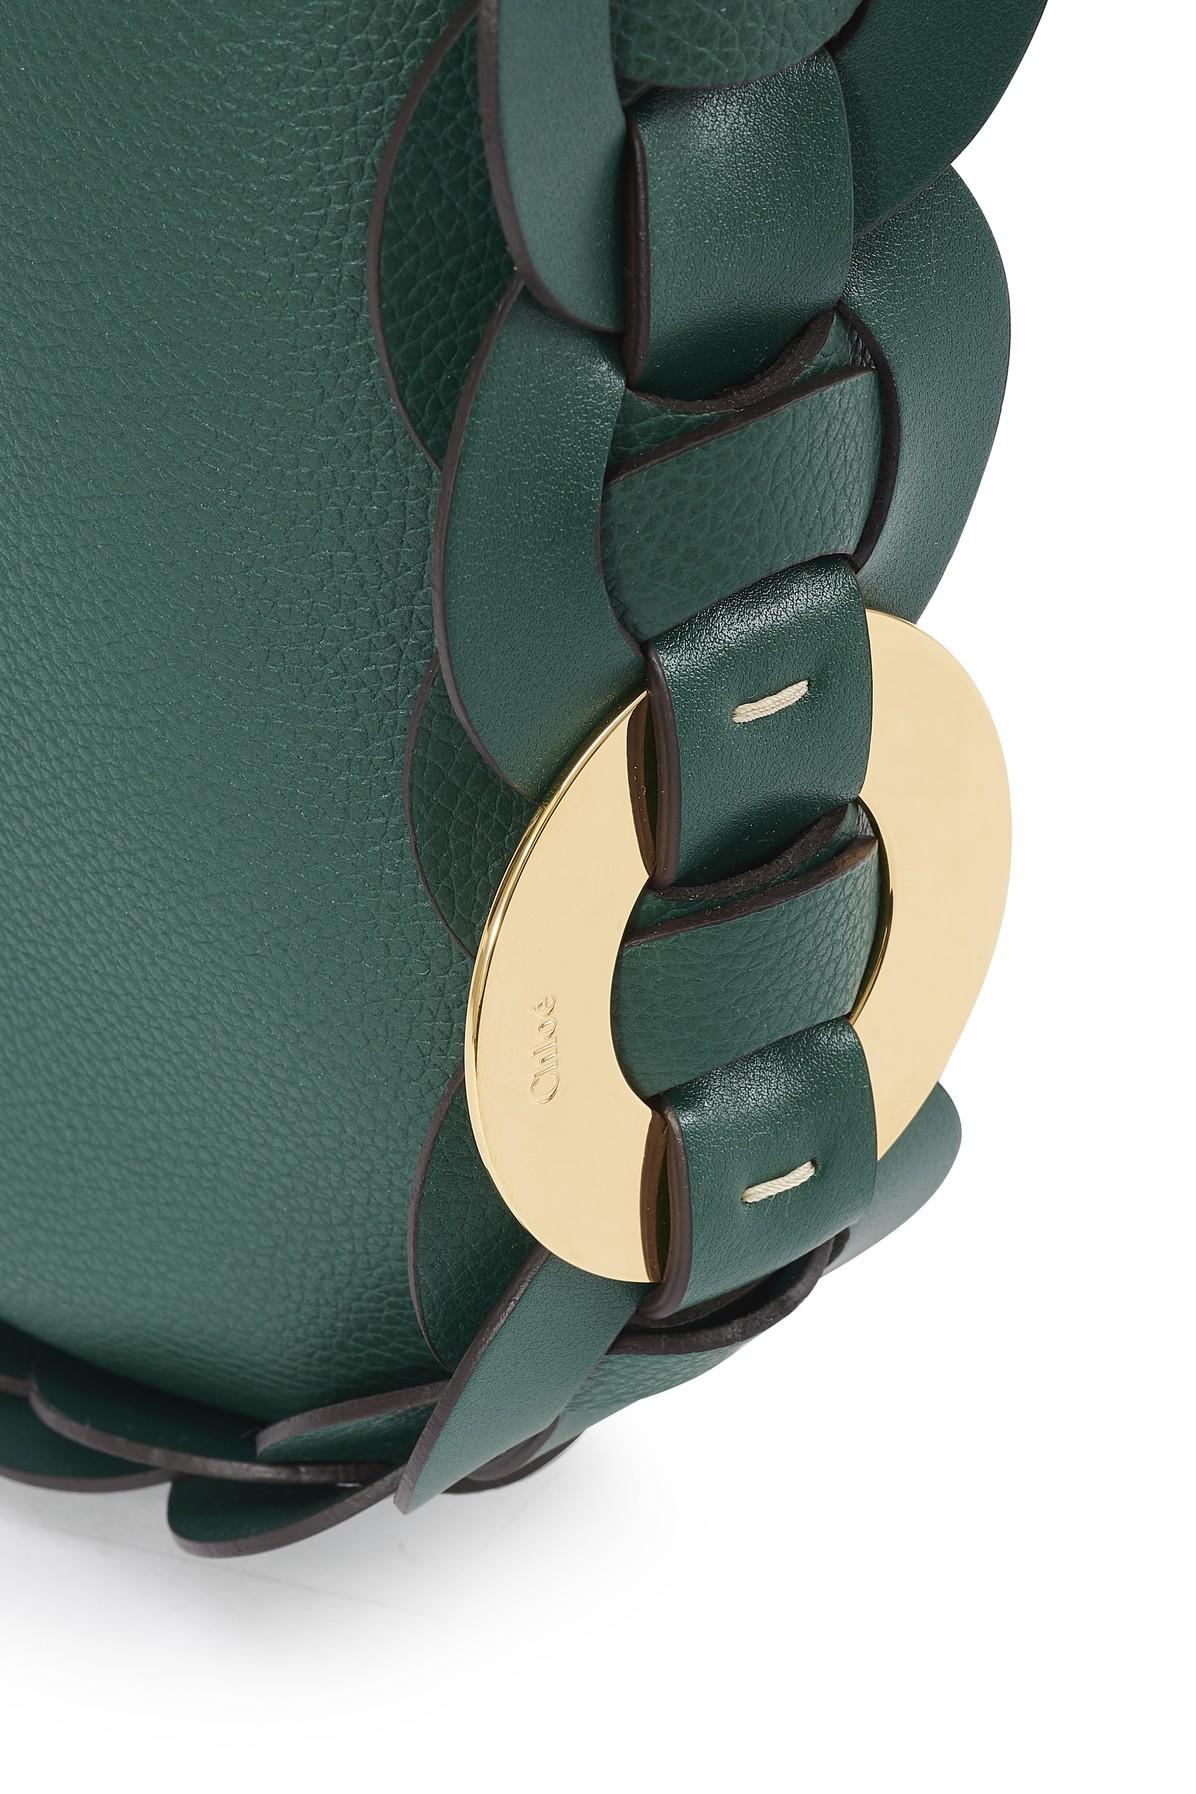 Chloé Darryl Small Hobo Bag Leather Rain Forest in Green | Lyst